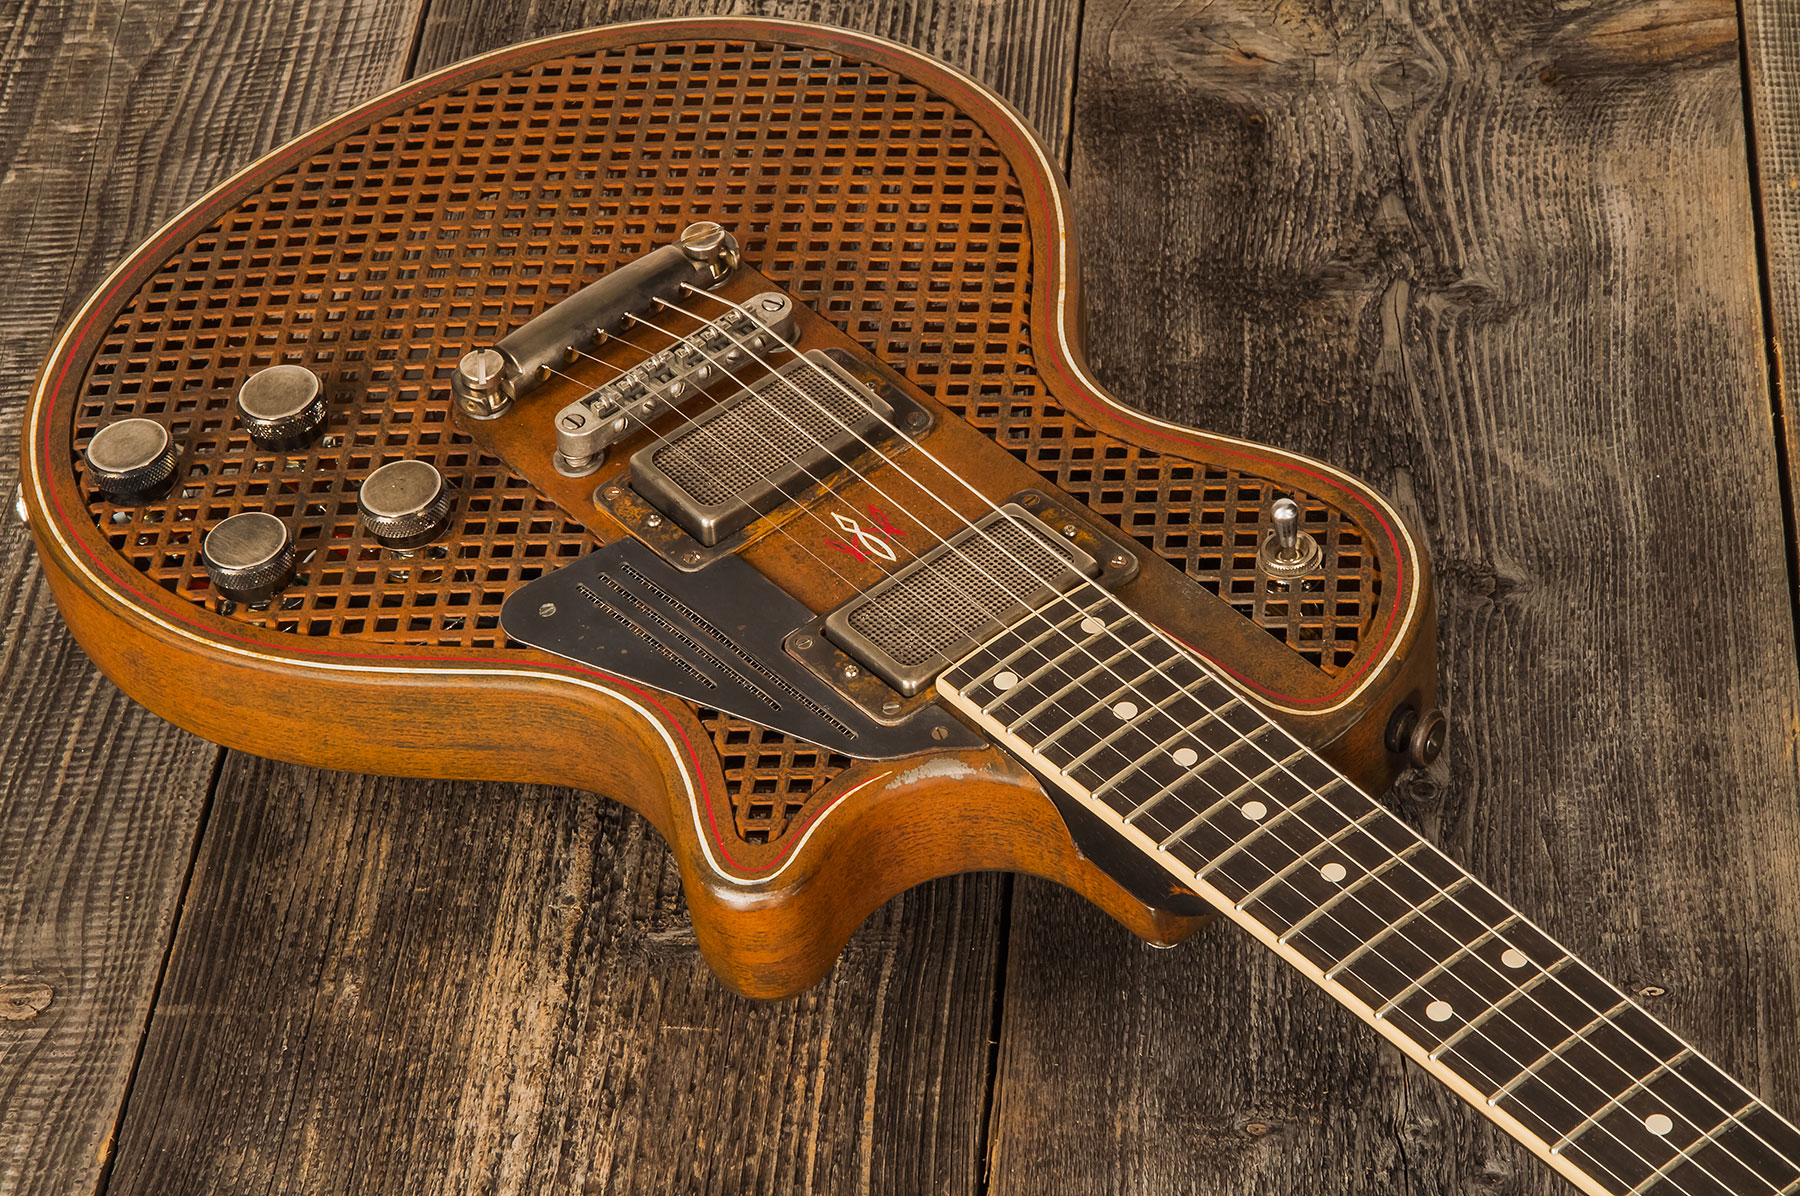 James Trussart Steeldeville Perf.front.back 2h Ht Eb #21179 - Rust O Matic Pinstriped Caged - Single cut electric guitar - Variation 1